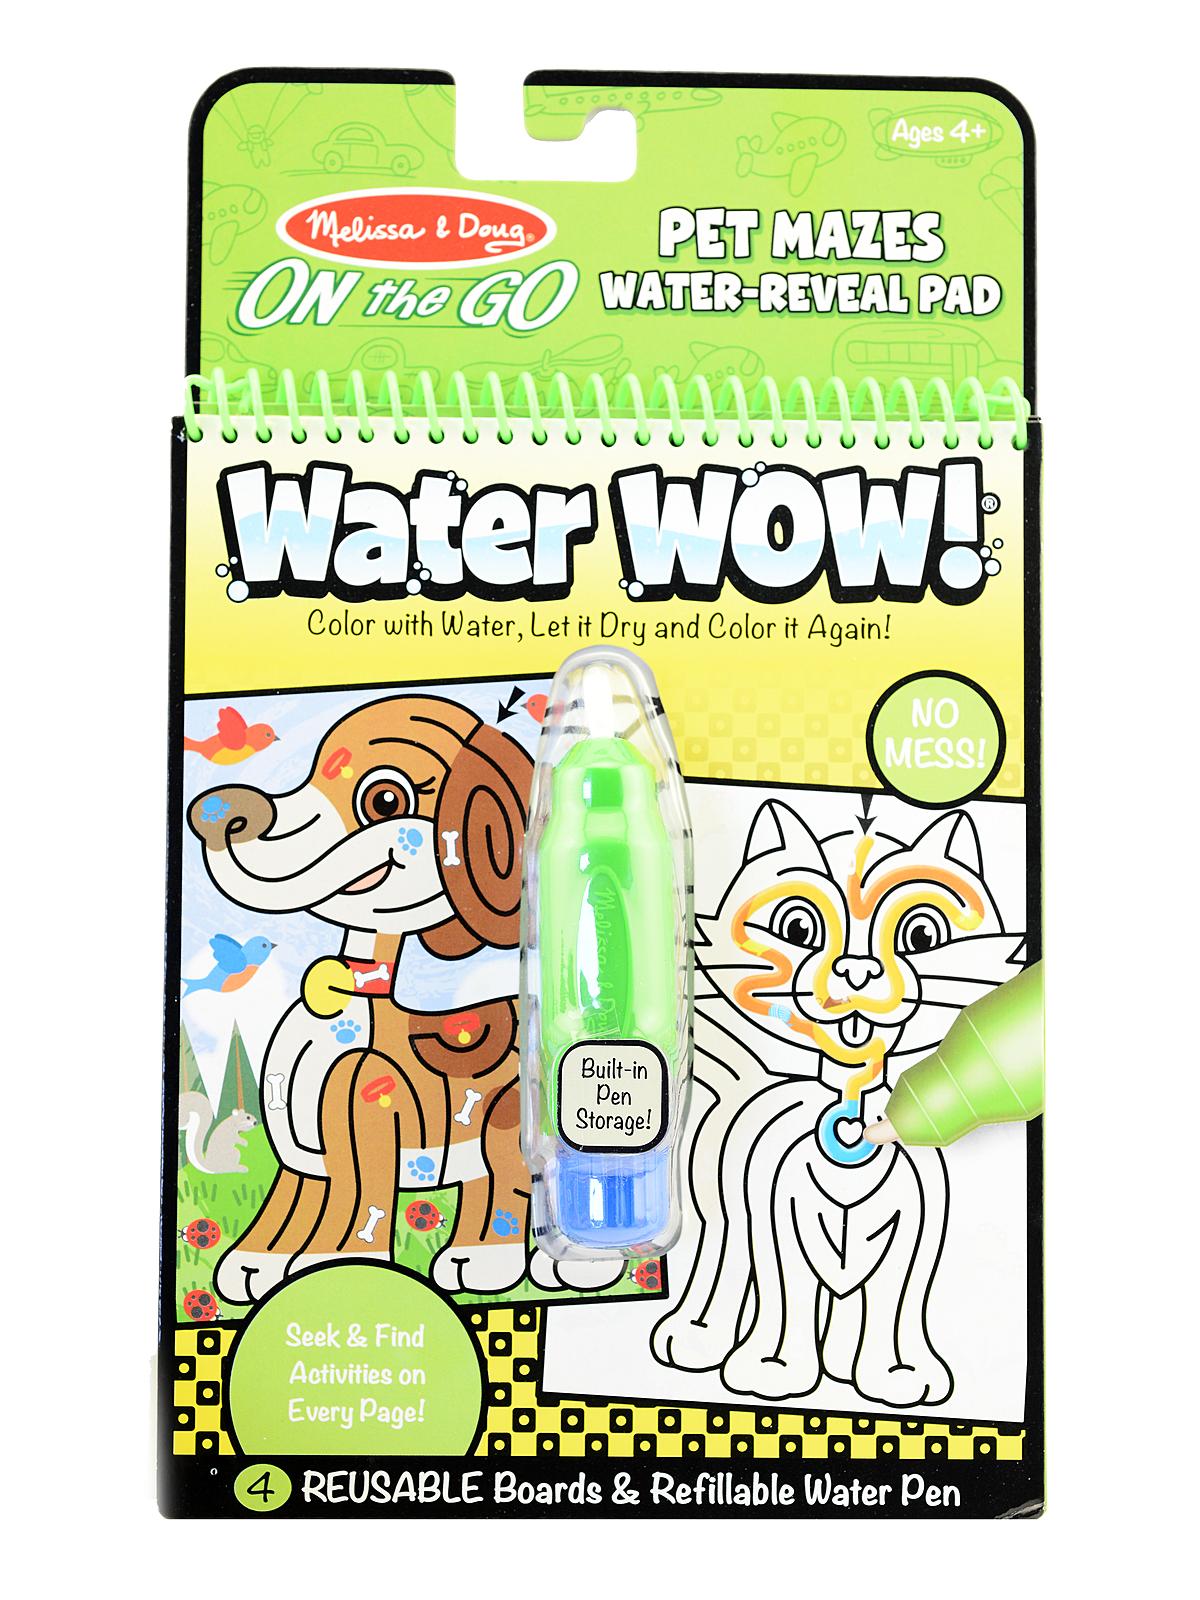 On The Go Water Wow Pet Mazes